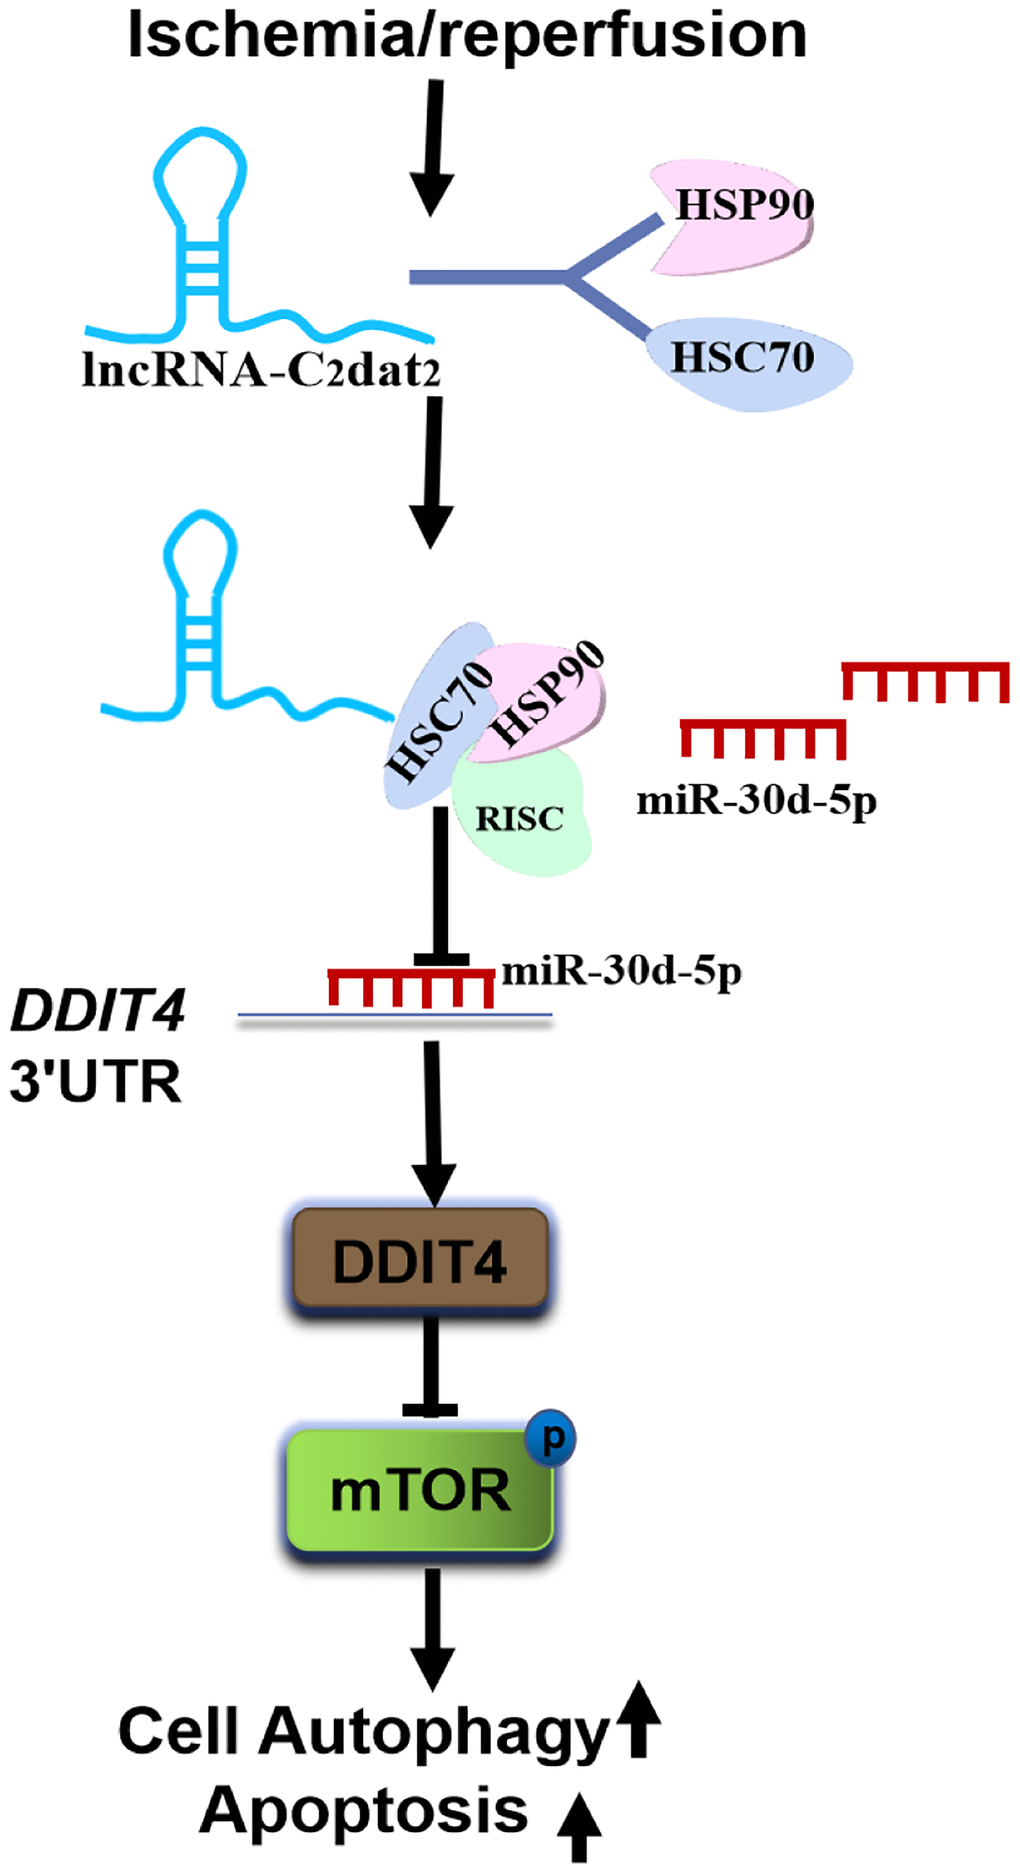 Diagram depicting the signaling mechanisms of C2dat2 in CIRI. CIRI induces up-regulated C2dat2 to bind with HSC70/HSP90, blocks the RISC assembly, reduces the chaperone to load miR-30d-5p duplexes into Ago proteins, and inhibits the miR-30d-5p silencing of DDIT4 and then inhibits mTOR signaling pathway protein phosphorylation and facilitates neuronal autophagy and apoptosis.